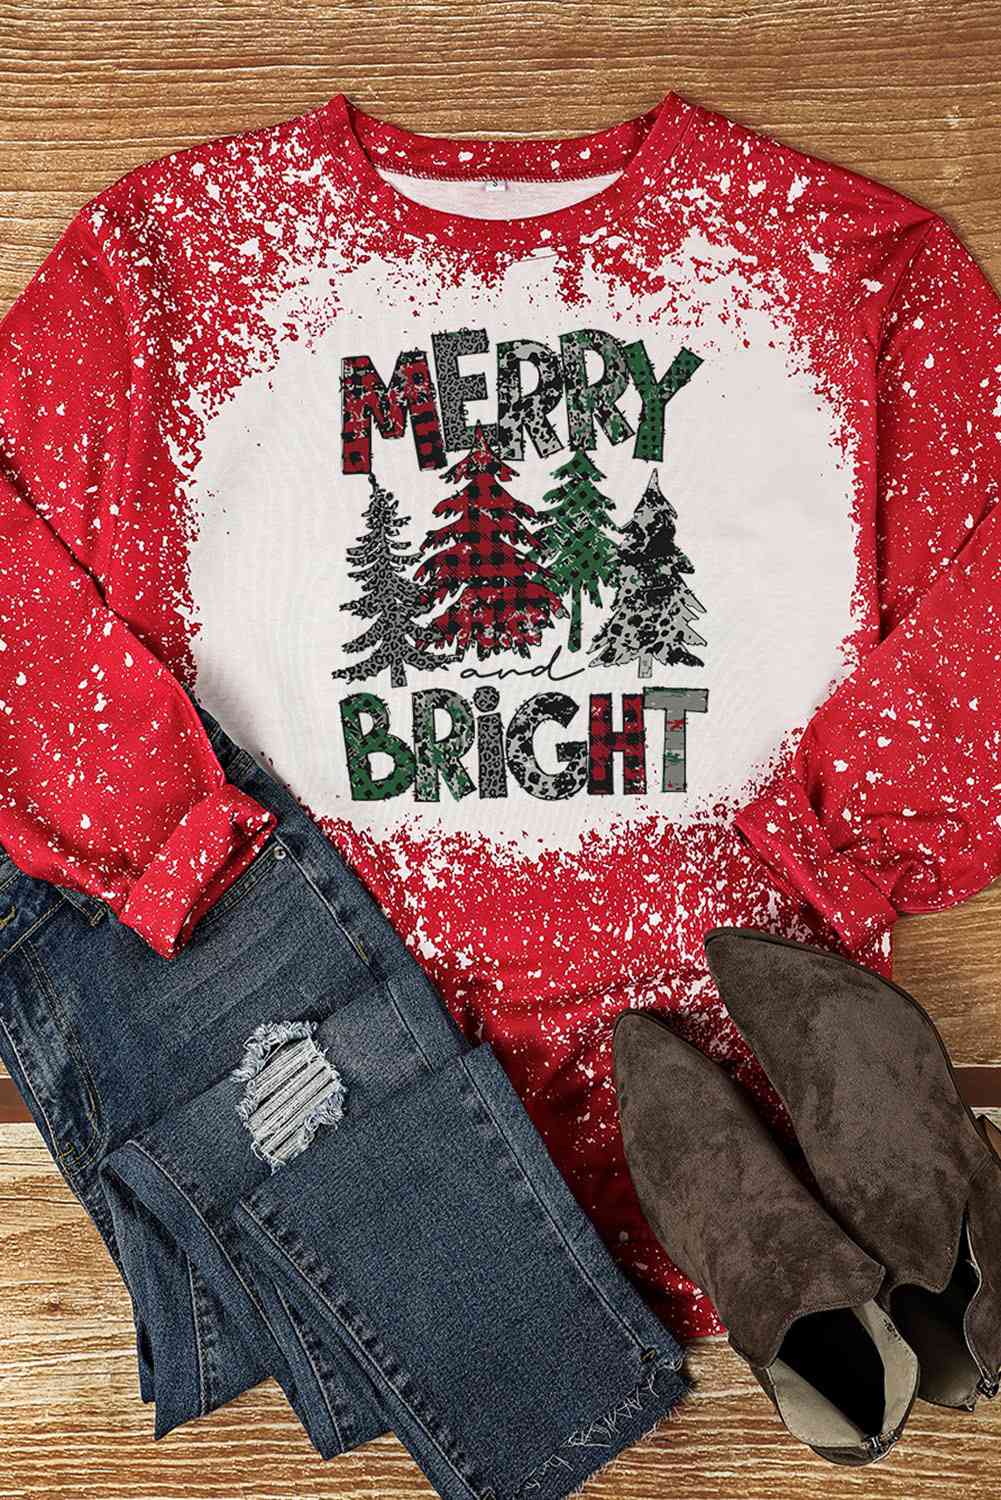 MERRY BRIGHT Graphic Long Sleeve T-Shirt - Kawaii Stop - Casual Comfort, Christmas, Christmas T-Shirt, Festive Fashion, Festive Look, Graphic Tee, Holiday Apparel, Holiday Cheer, Seasonal Style, Ship From Overseas, SYNZ, Winter Wardrobe